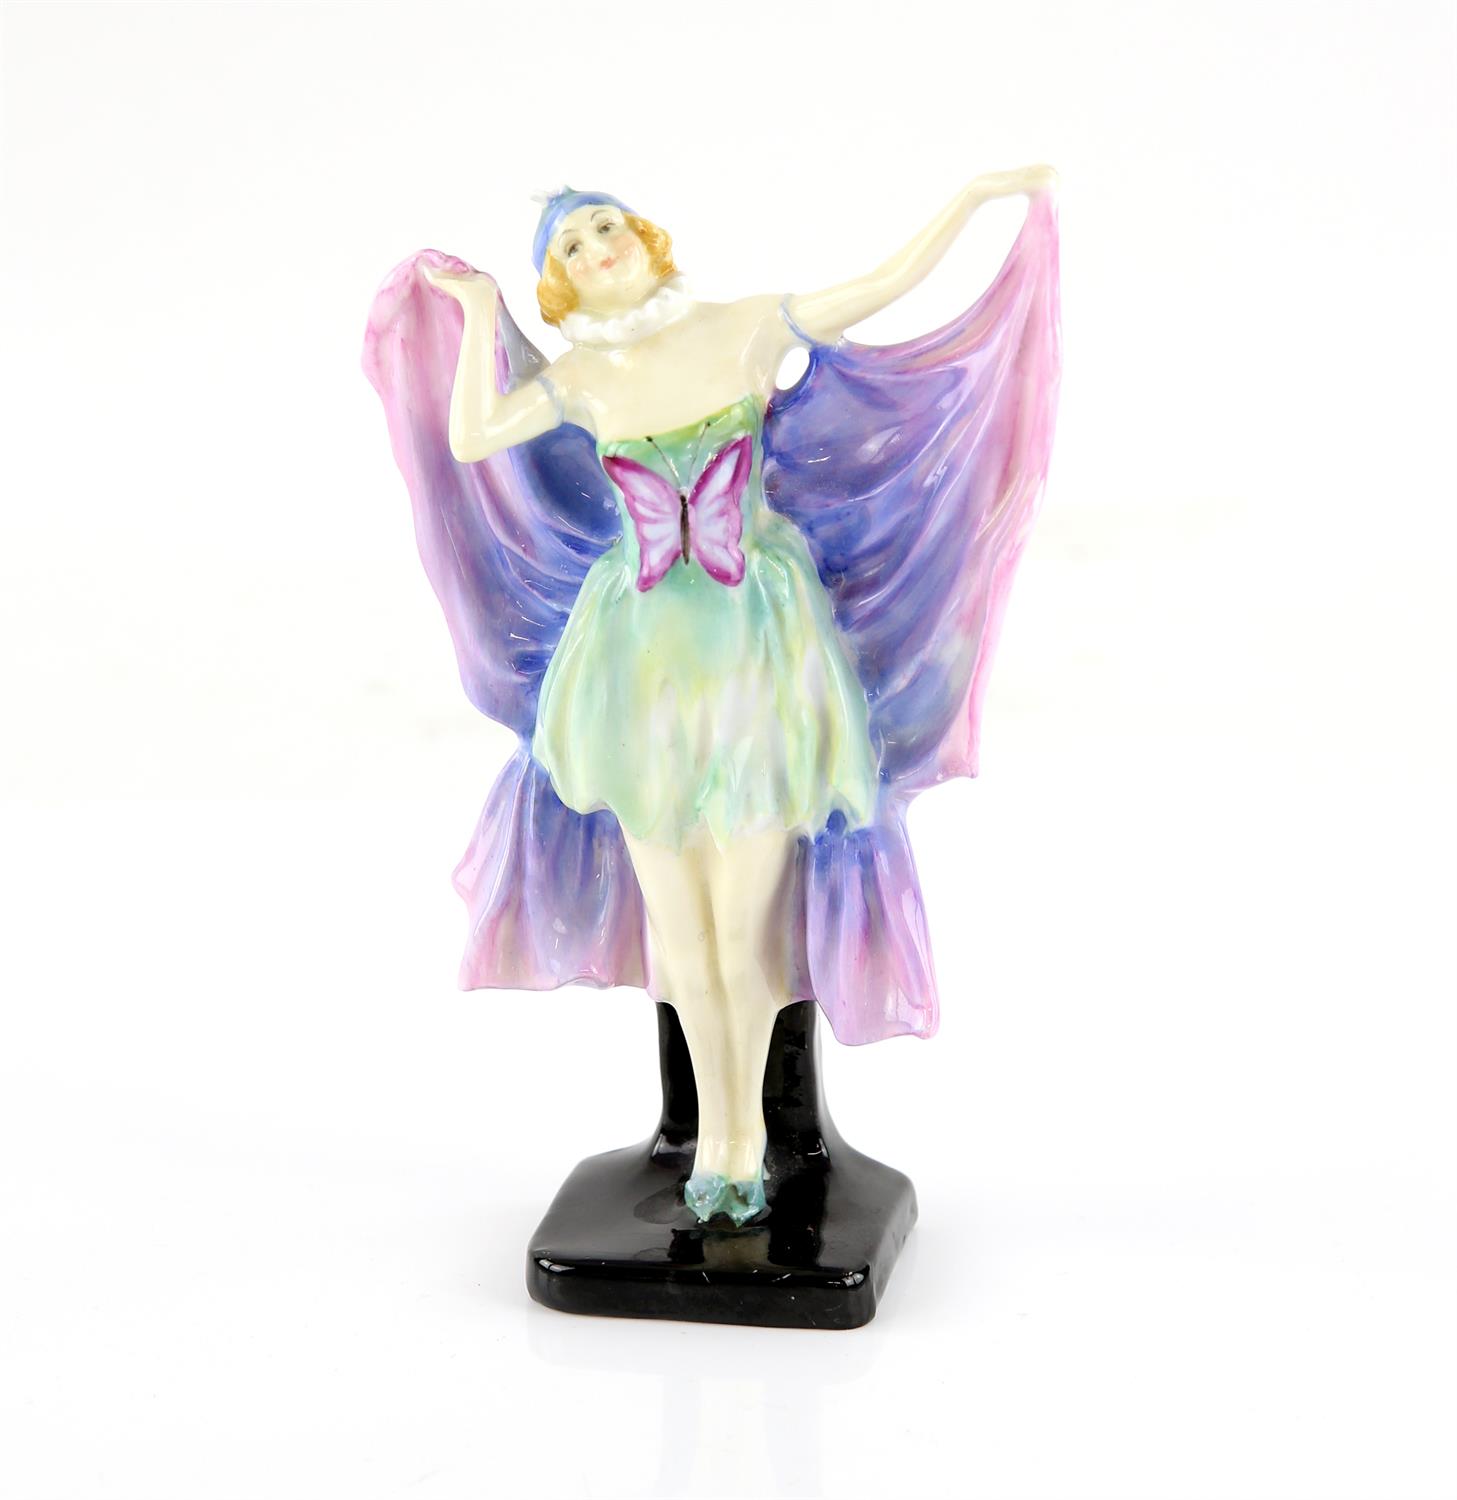 Doulton figurine by Leslie Harradine, issued: 1931 - 1940 ' Butterfly Girl ' ceramic model of a